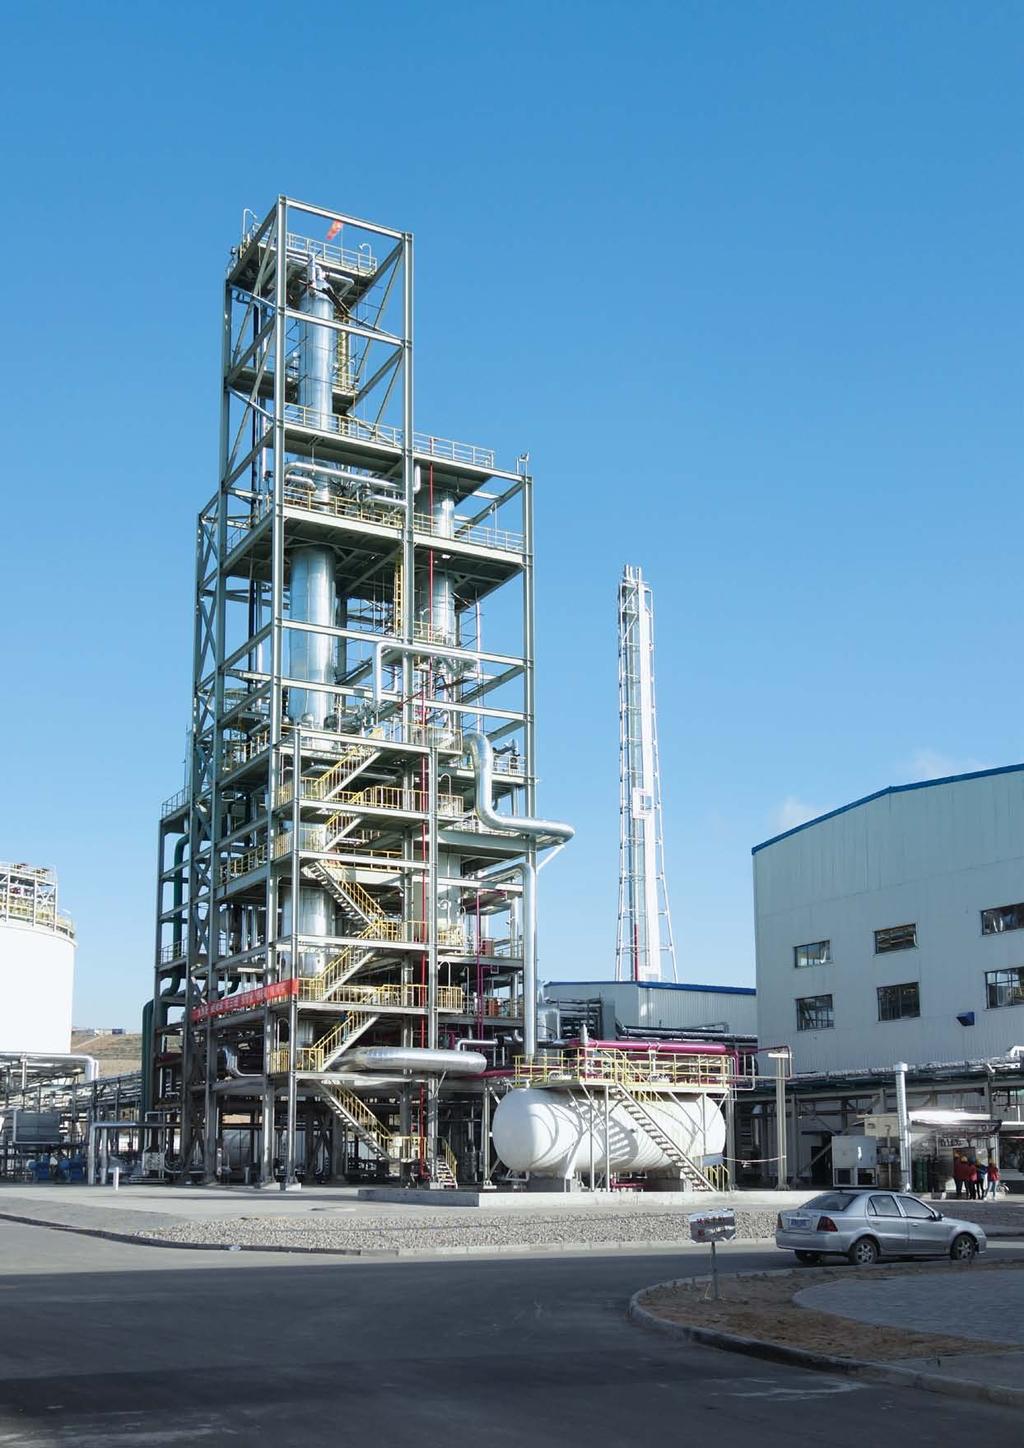 To avoid multiple parallel blocks of PFHEs, which results in complex piping arrangements, higher plot space requirements and potential flow distribution issues, Linde offers its LIMUM 3 liquefaction